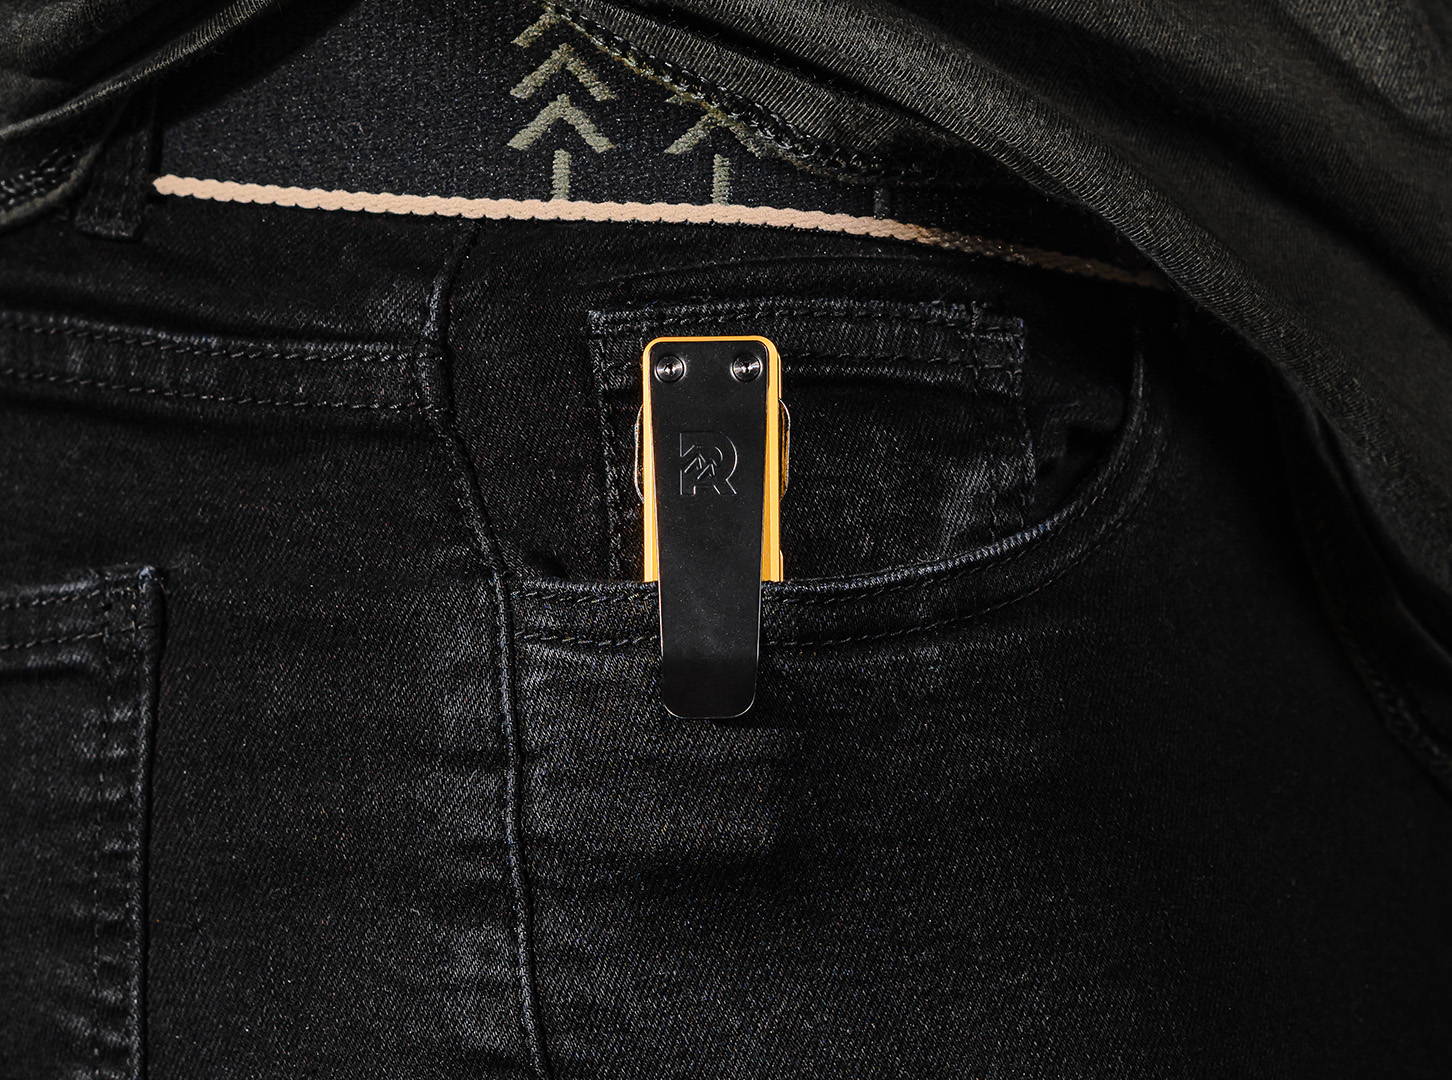 24K Gold keycase clipped in front pocket